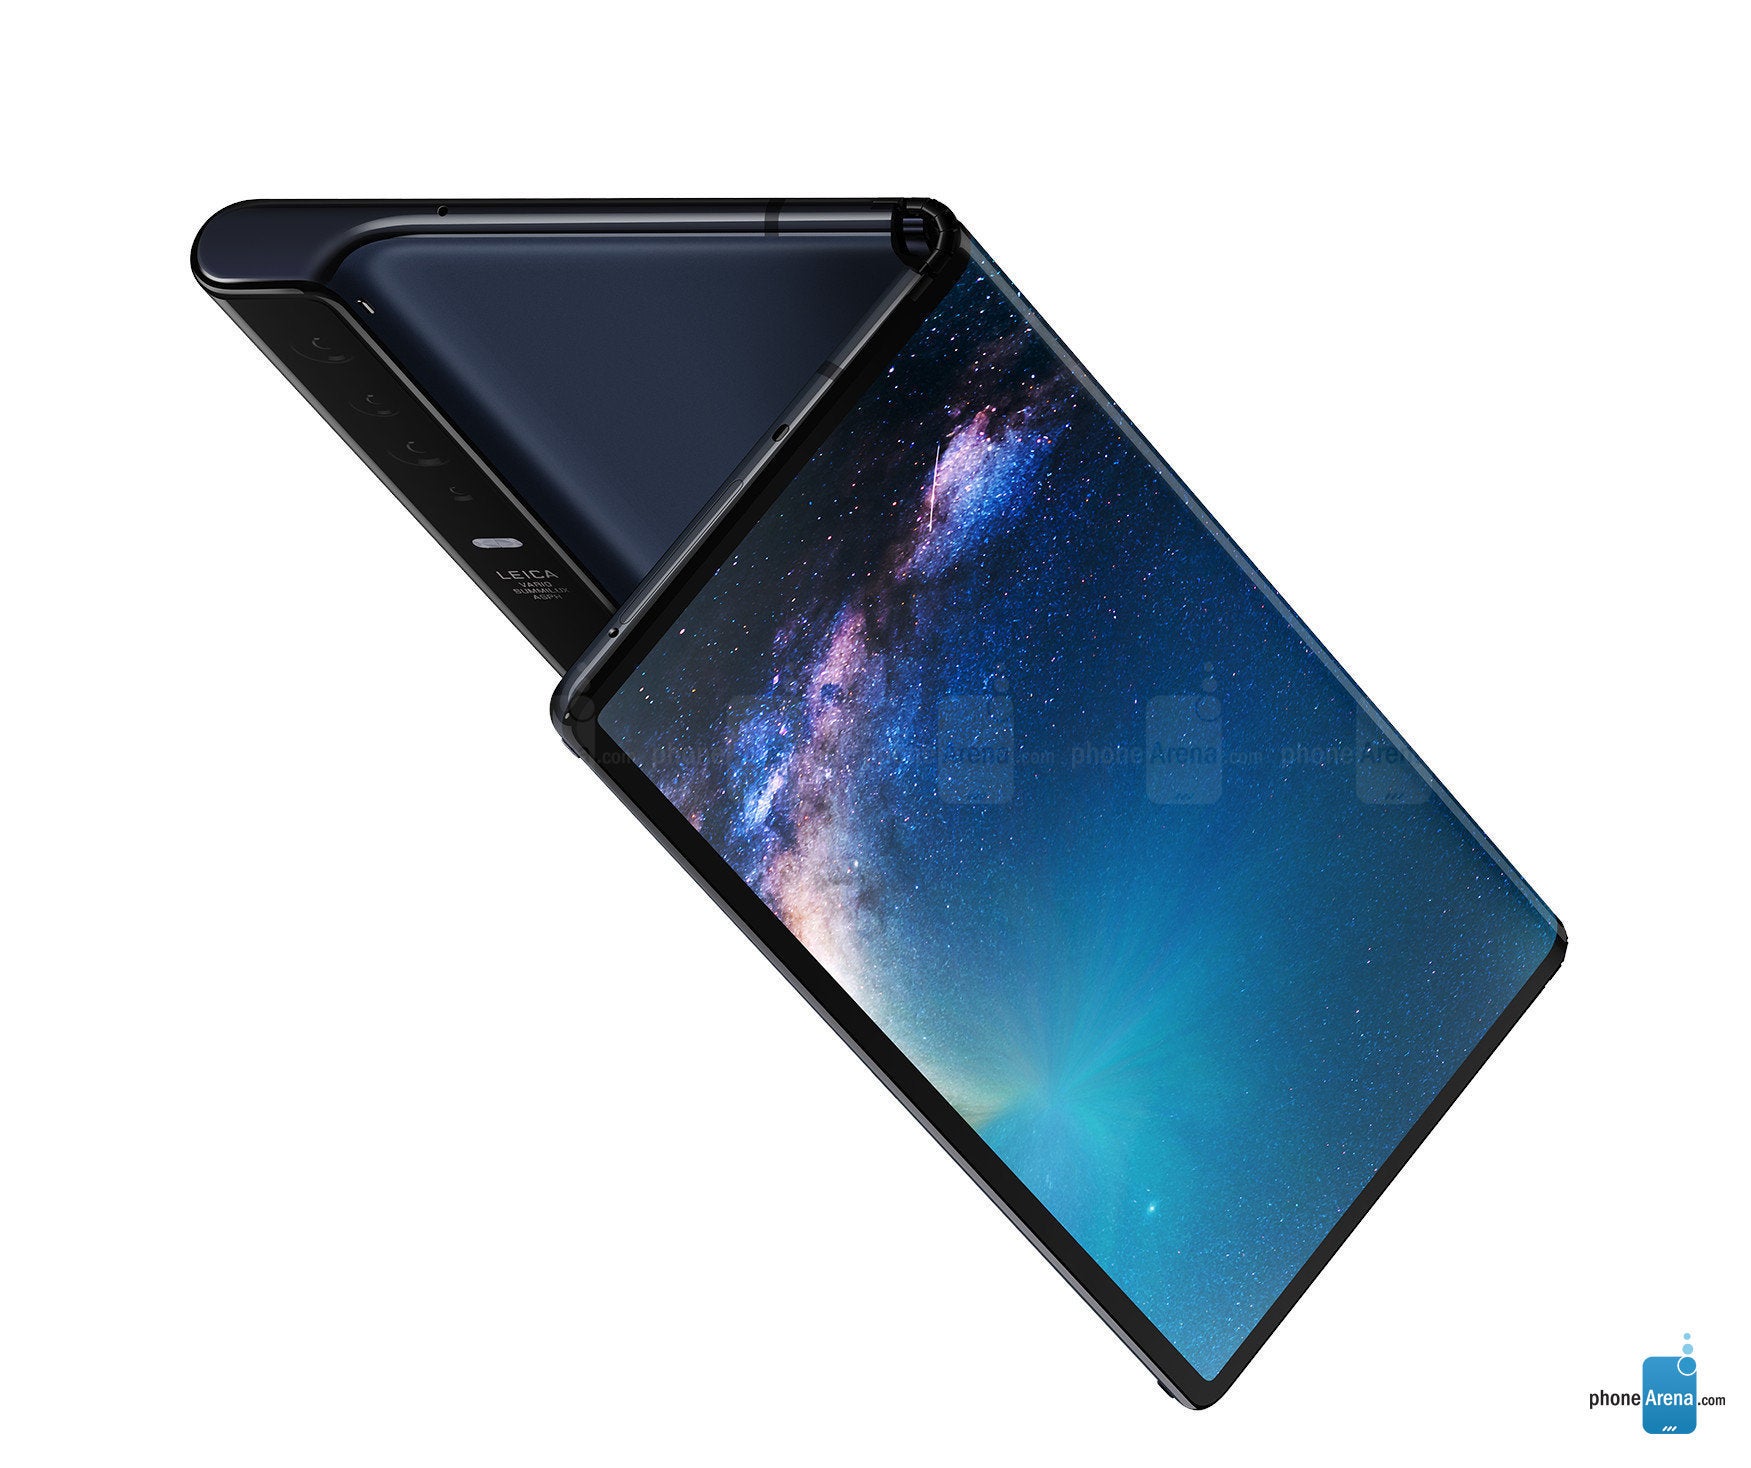 The Huawei Mate X will launch no later than September says Huawei executive - Huawei Mate X will launch no later than September with Android installed says Huawei executive